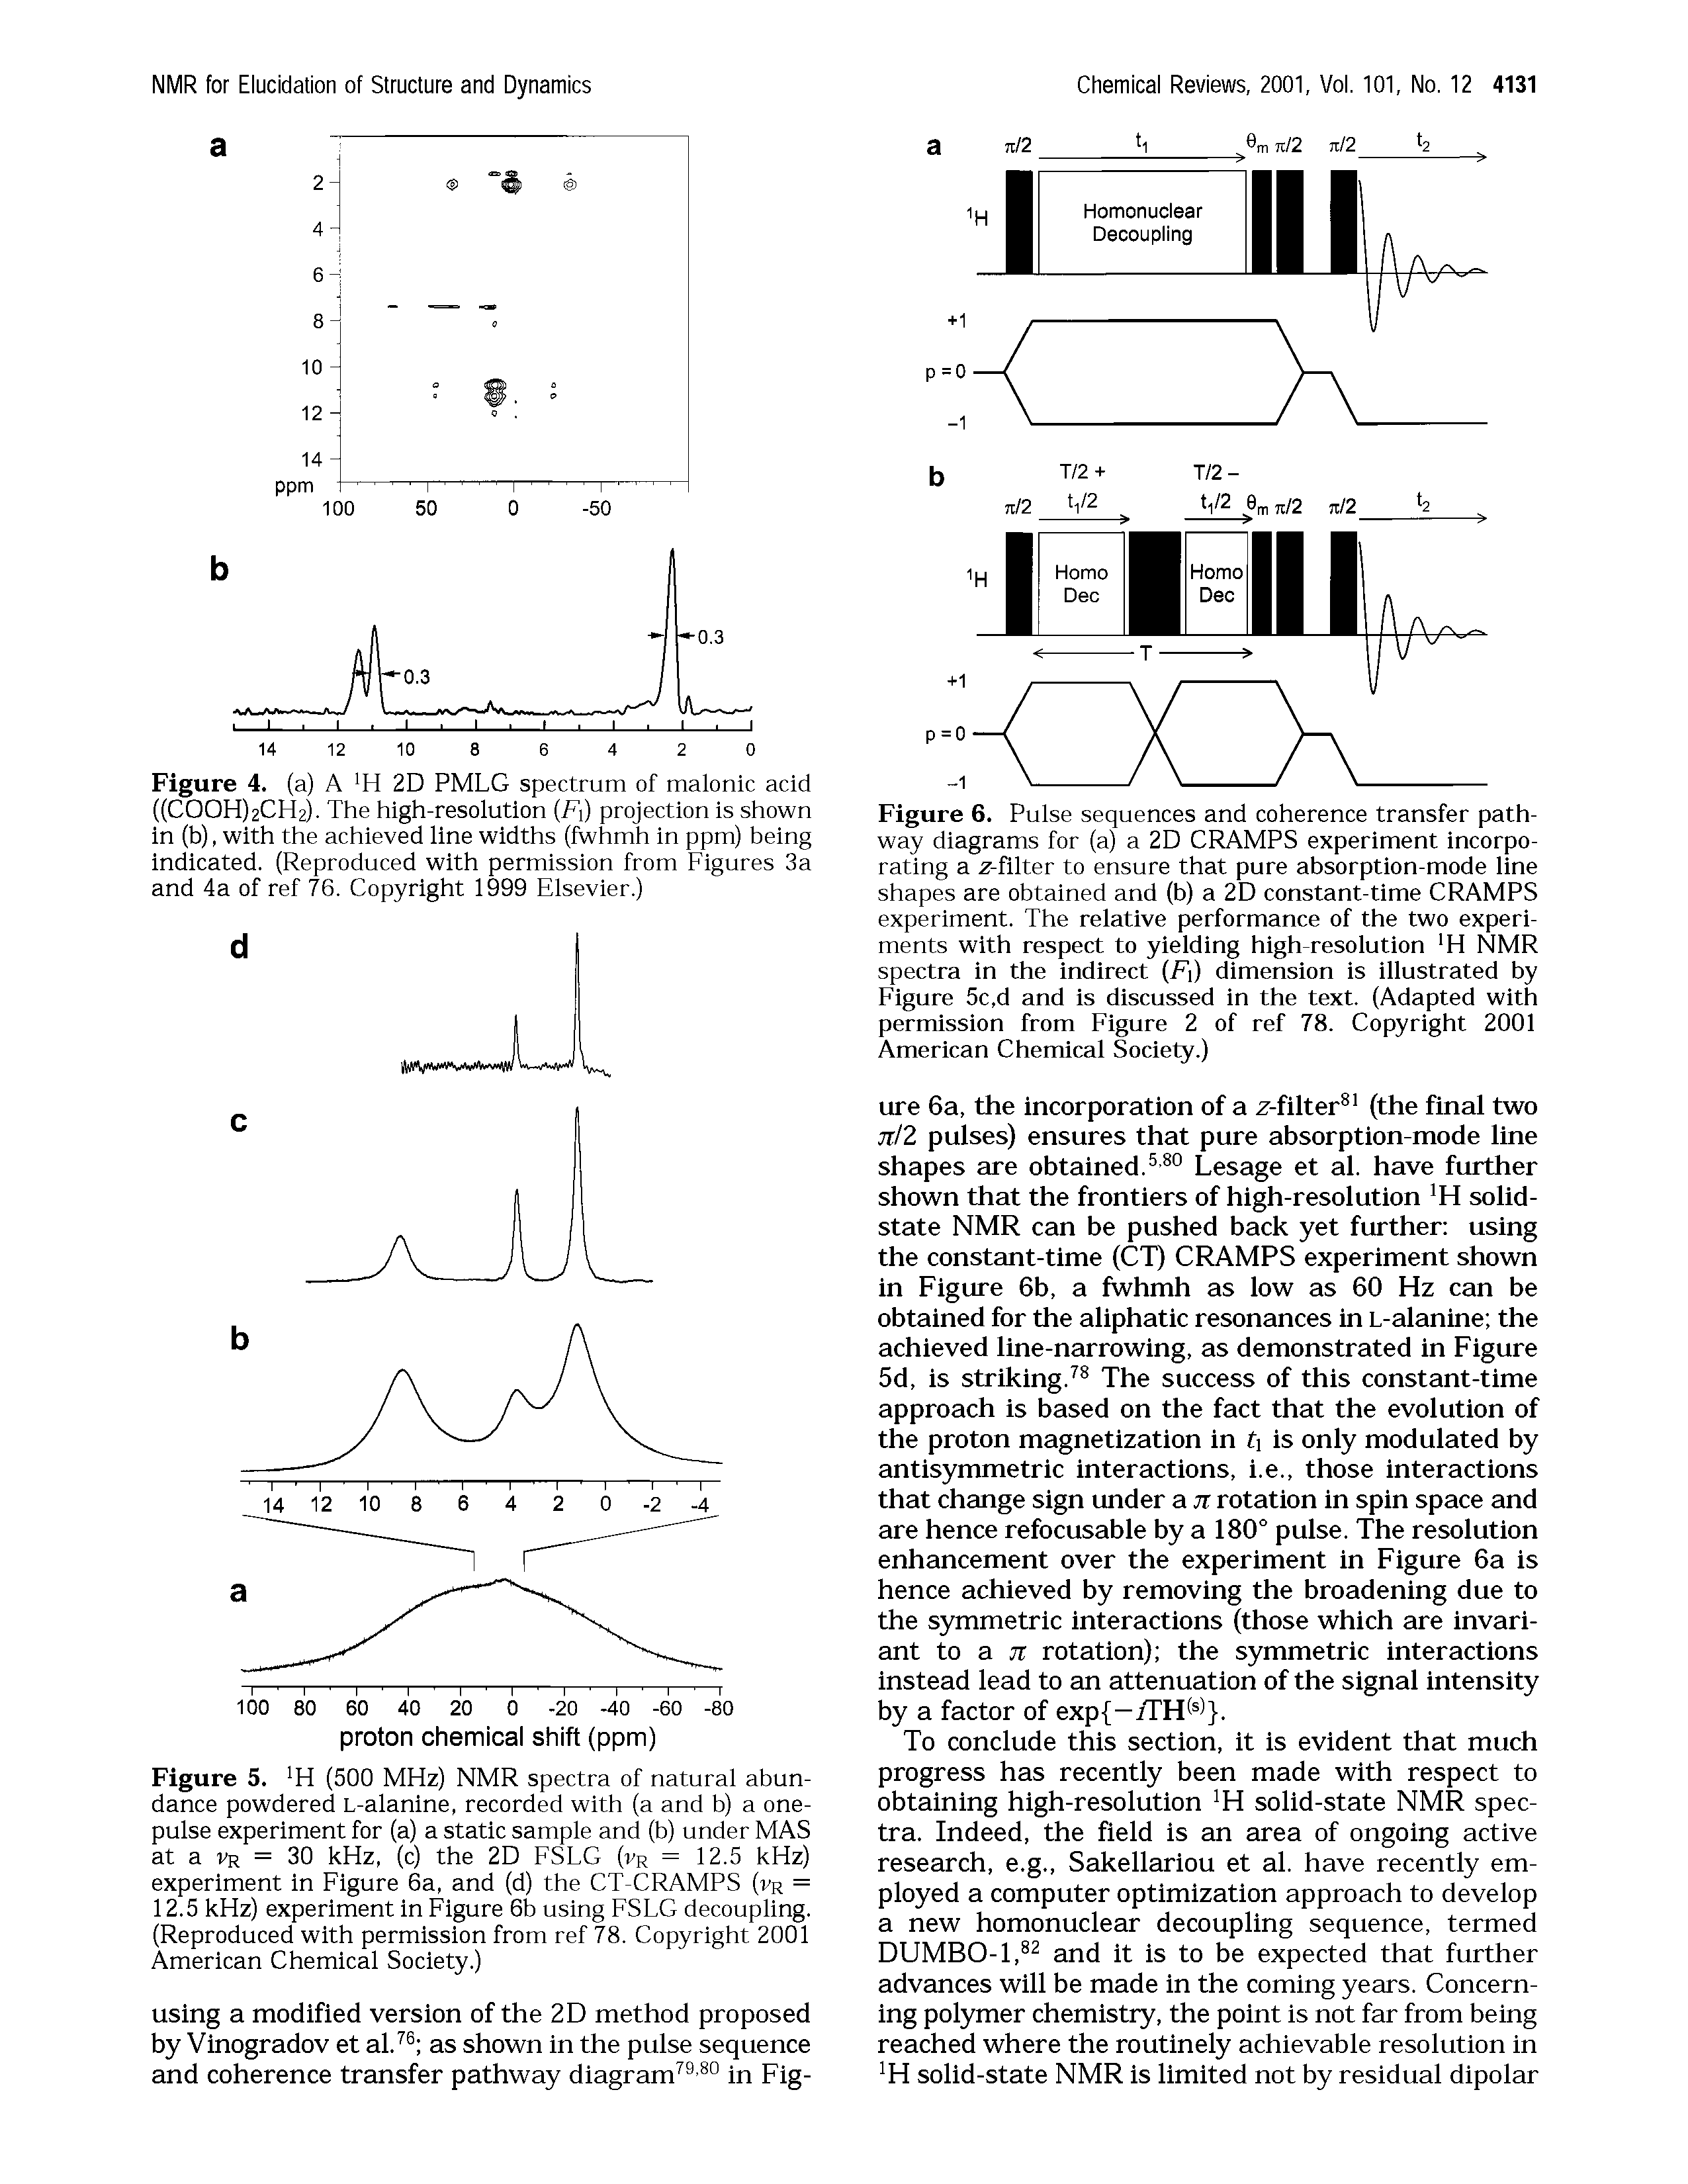 Figure 6. Pulse sequences and coherence transfer pathway diagrams for (a) a 2D CRAMPS experiment incorporating a z-filter to ensure that pure absorption-mode line shapes are obtained and (b) a 2D constant-time CRAMPS experiment. The relative performance of the two experiments with respect to yielding high-resolution H NMR spectra in the indirect (F ) dimension is illustrated by Figure 5c,d and is discussed in the text. (Adapted with permission from Figure 2 of ref 78. Copyright 2001 American Chemical Society.)...